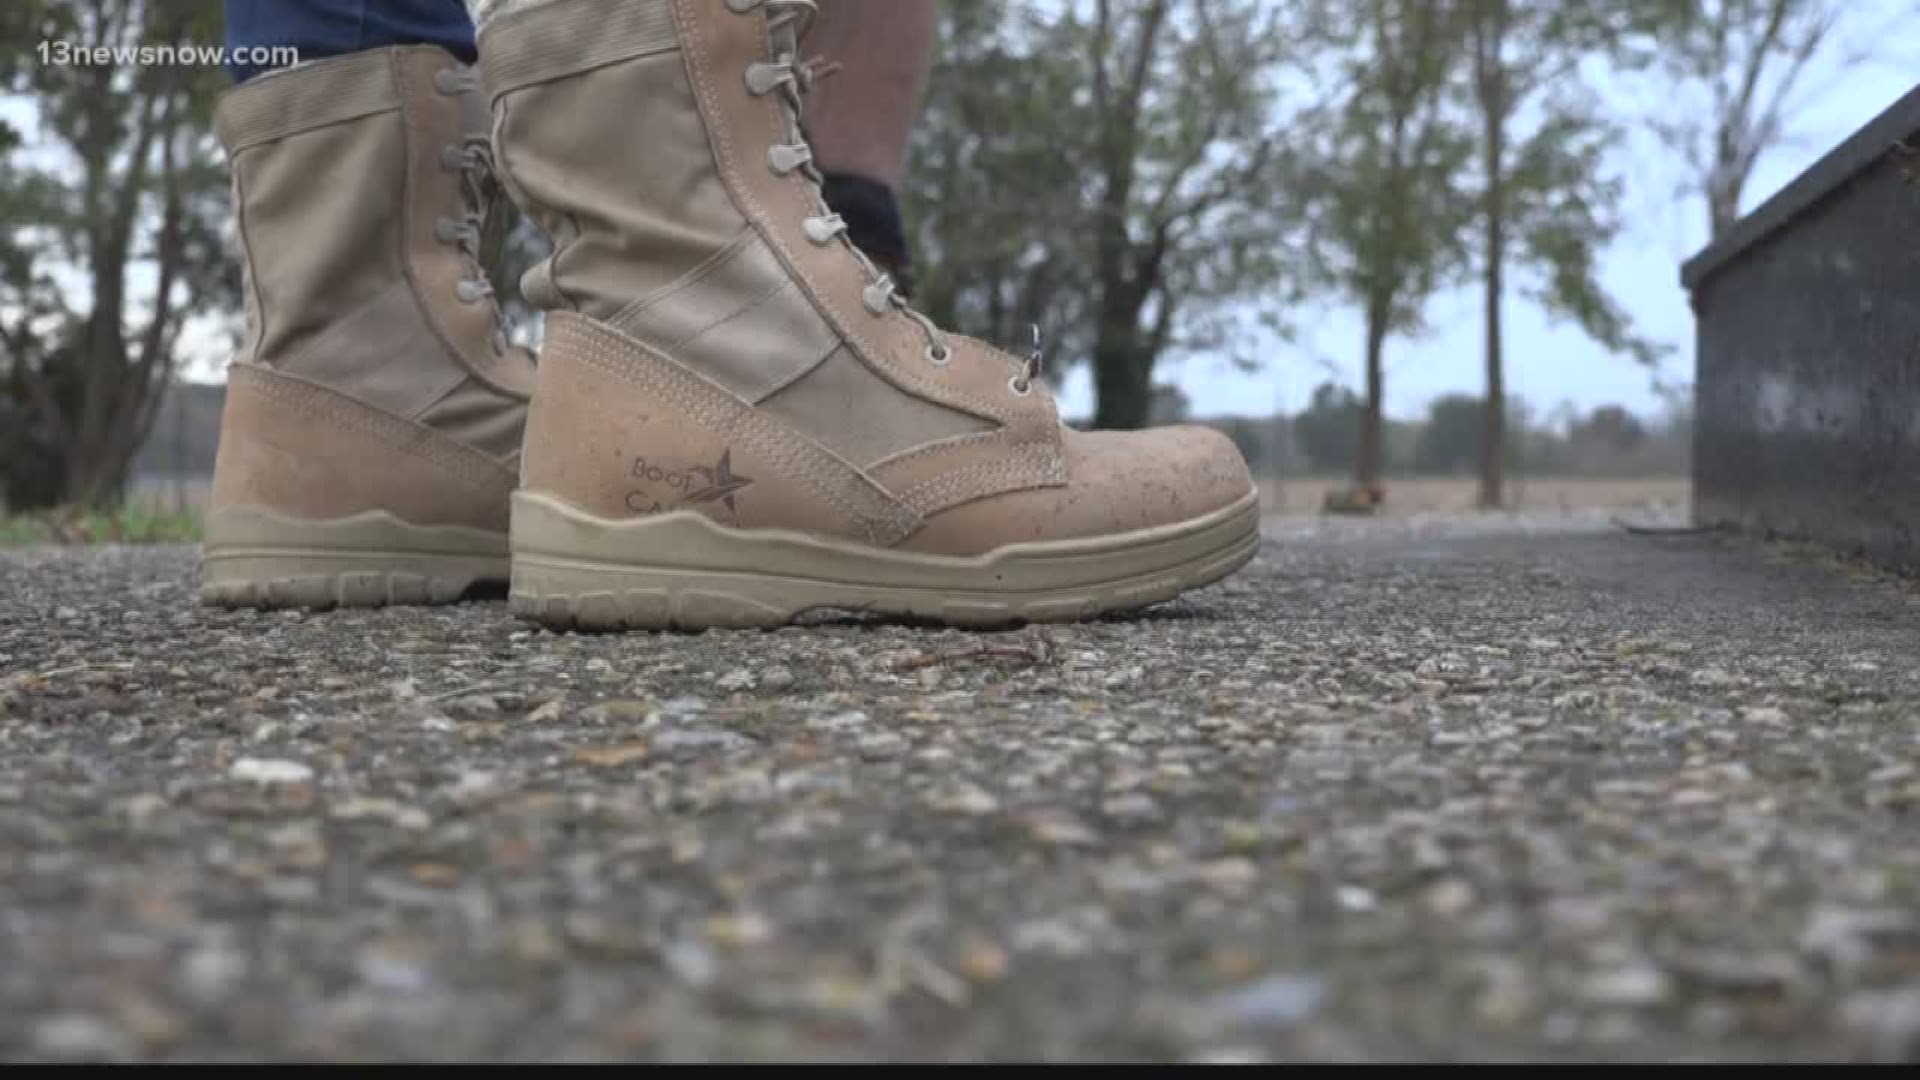 While many of us don't know what it's like to walk in a veteran's shoes, some local veterans are joining a national movement to teach you how you can help and start a conversation about what it's like by wearing their combat boots for the week leading up